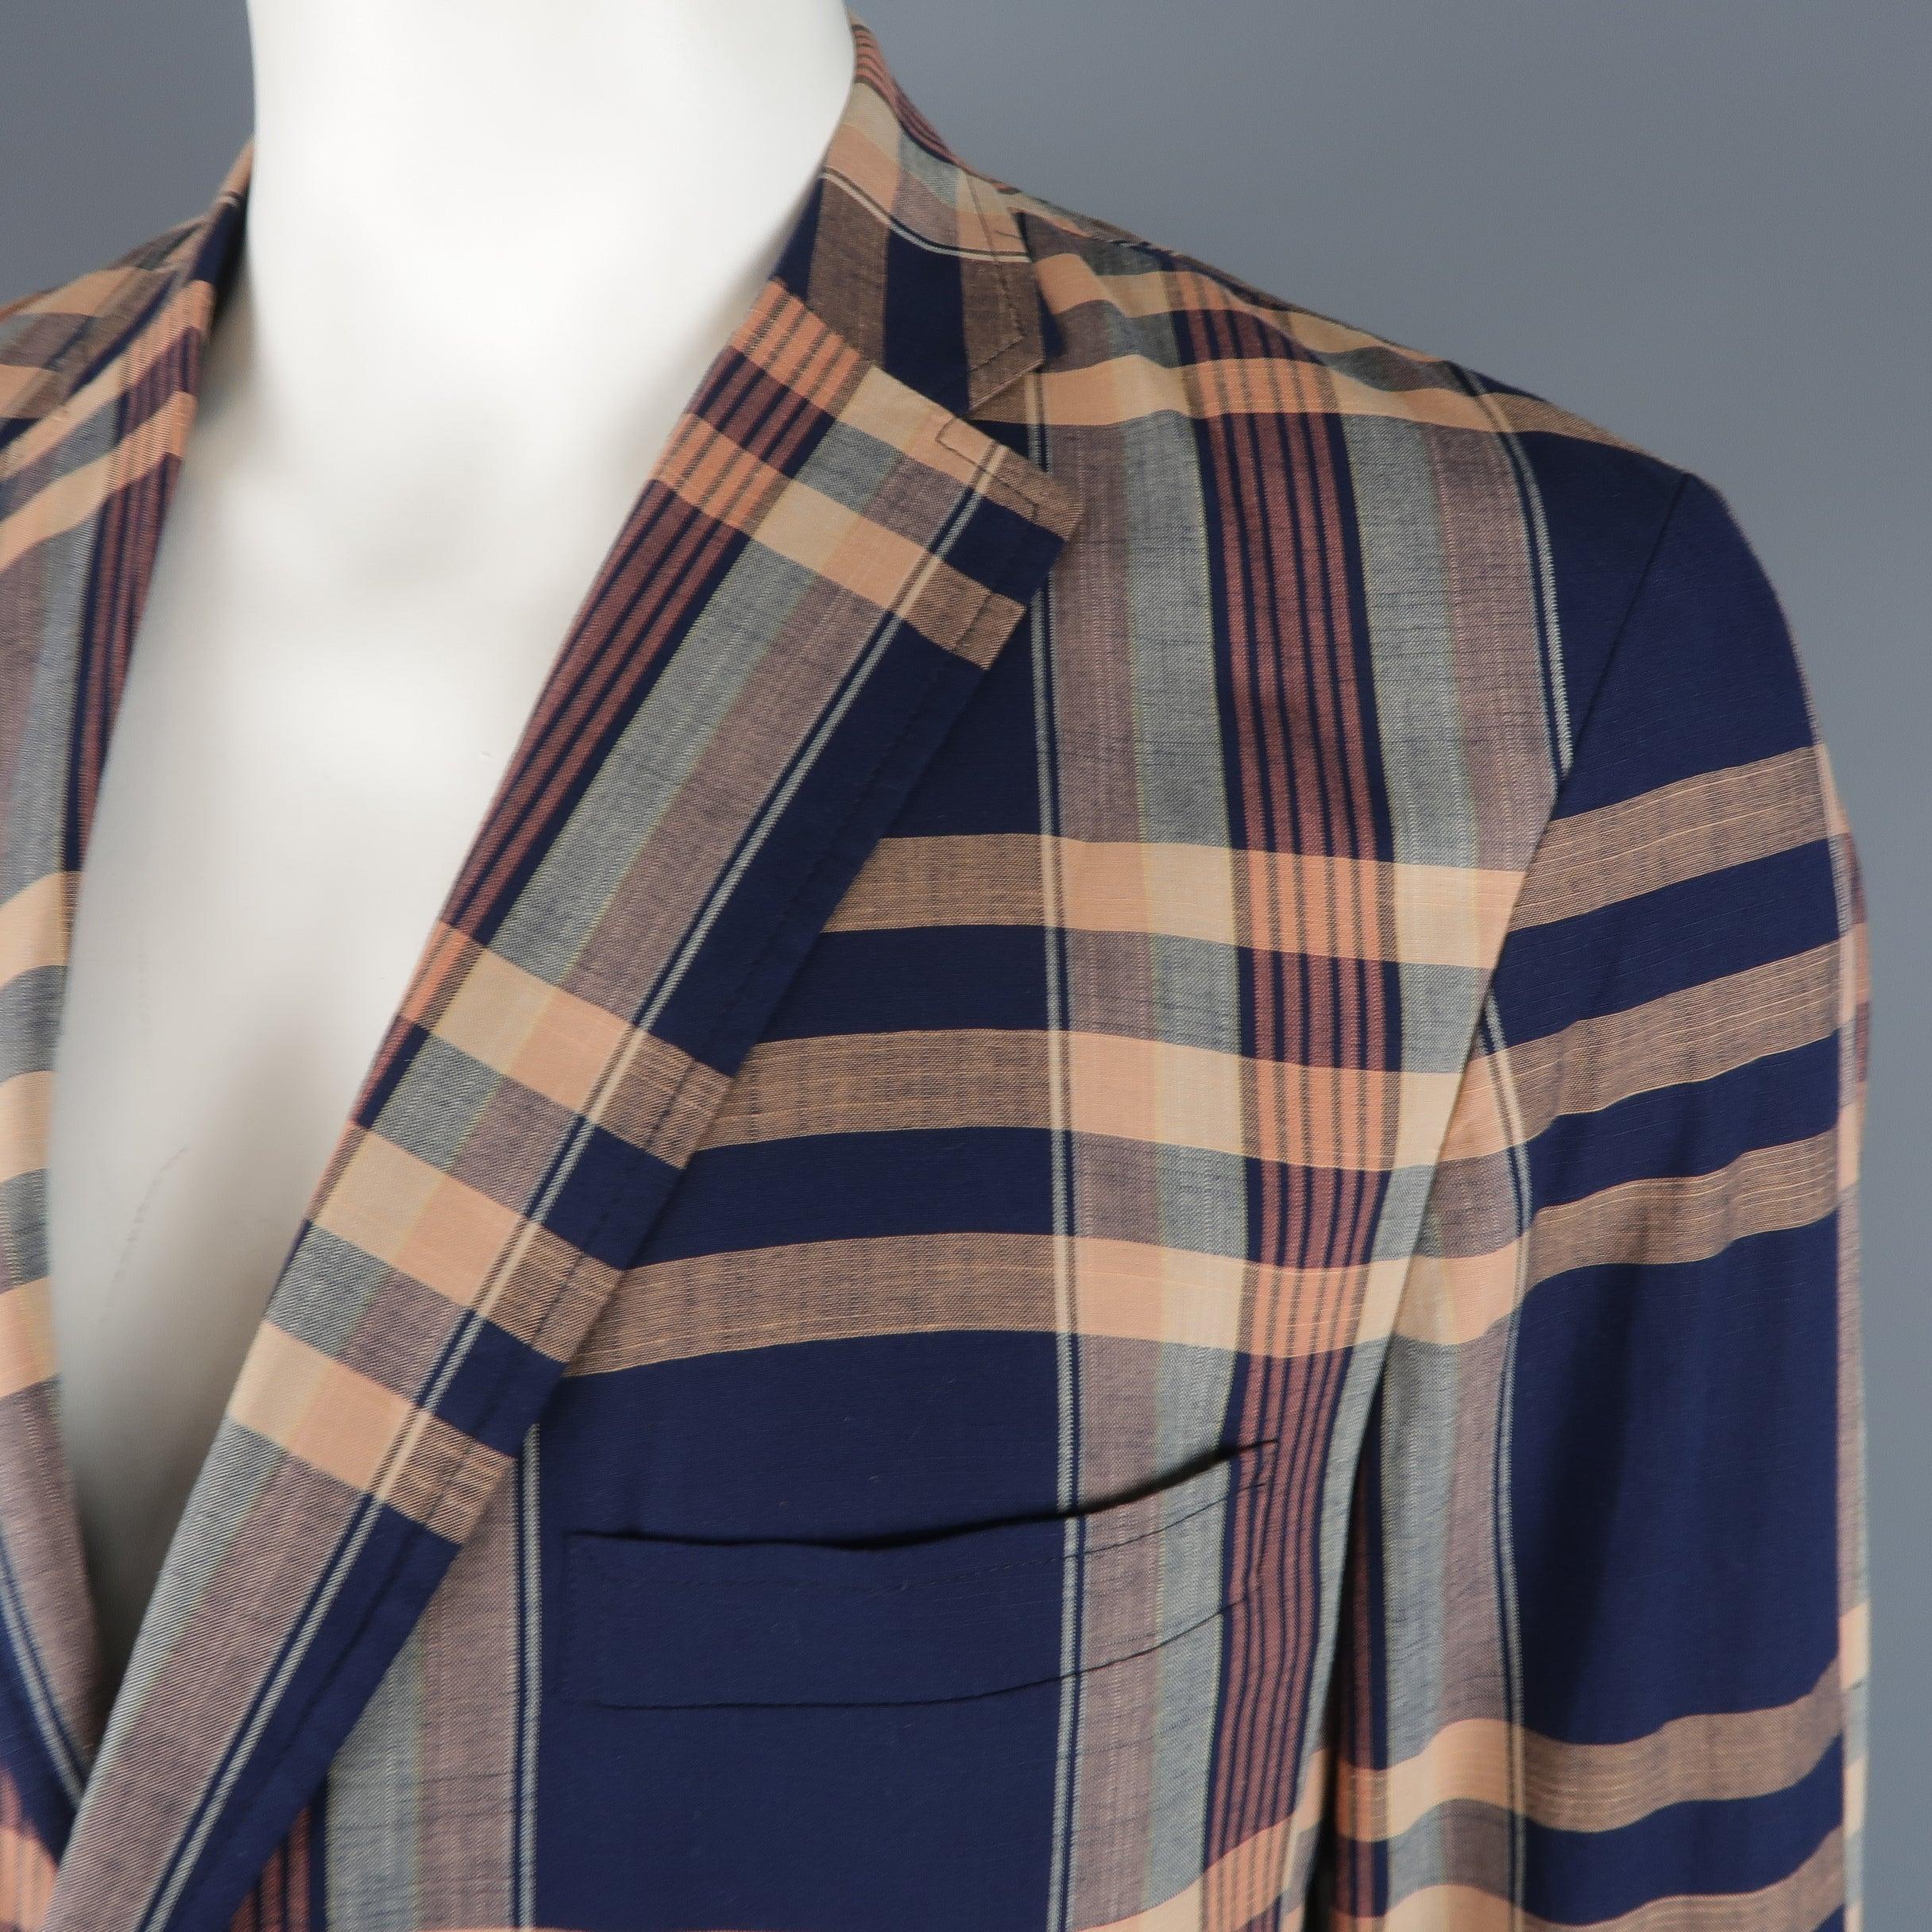 Single breasted GITMAN BROS X UNIONMADE casual sport coat comes in Navy and peach plaid pattern cotton a notch lapel, two button front, and patch flap pockets. Made in USA.New with Tags. 

Marked:   44 

Measurements: 
 
Shoulder: 19 inches Chest: